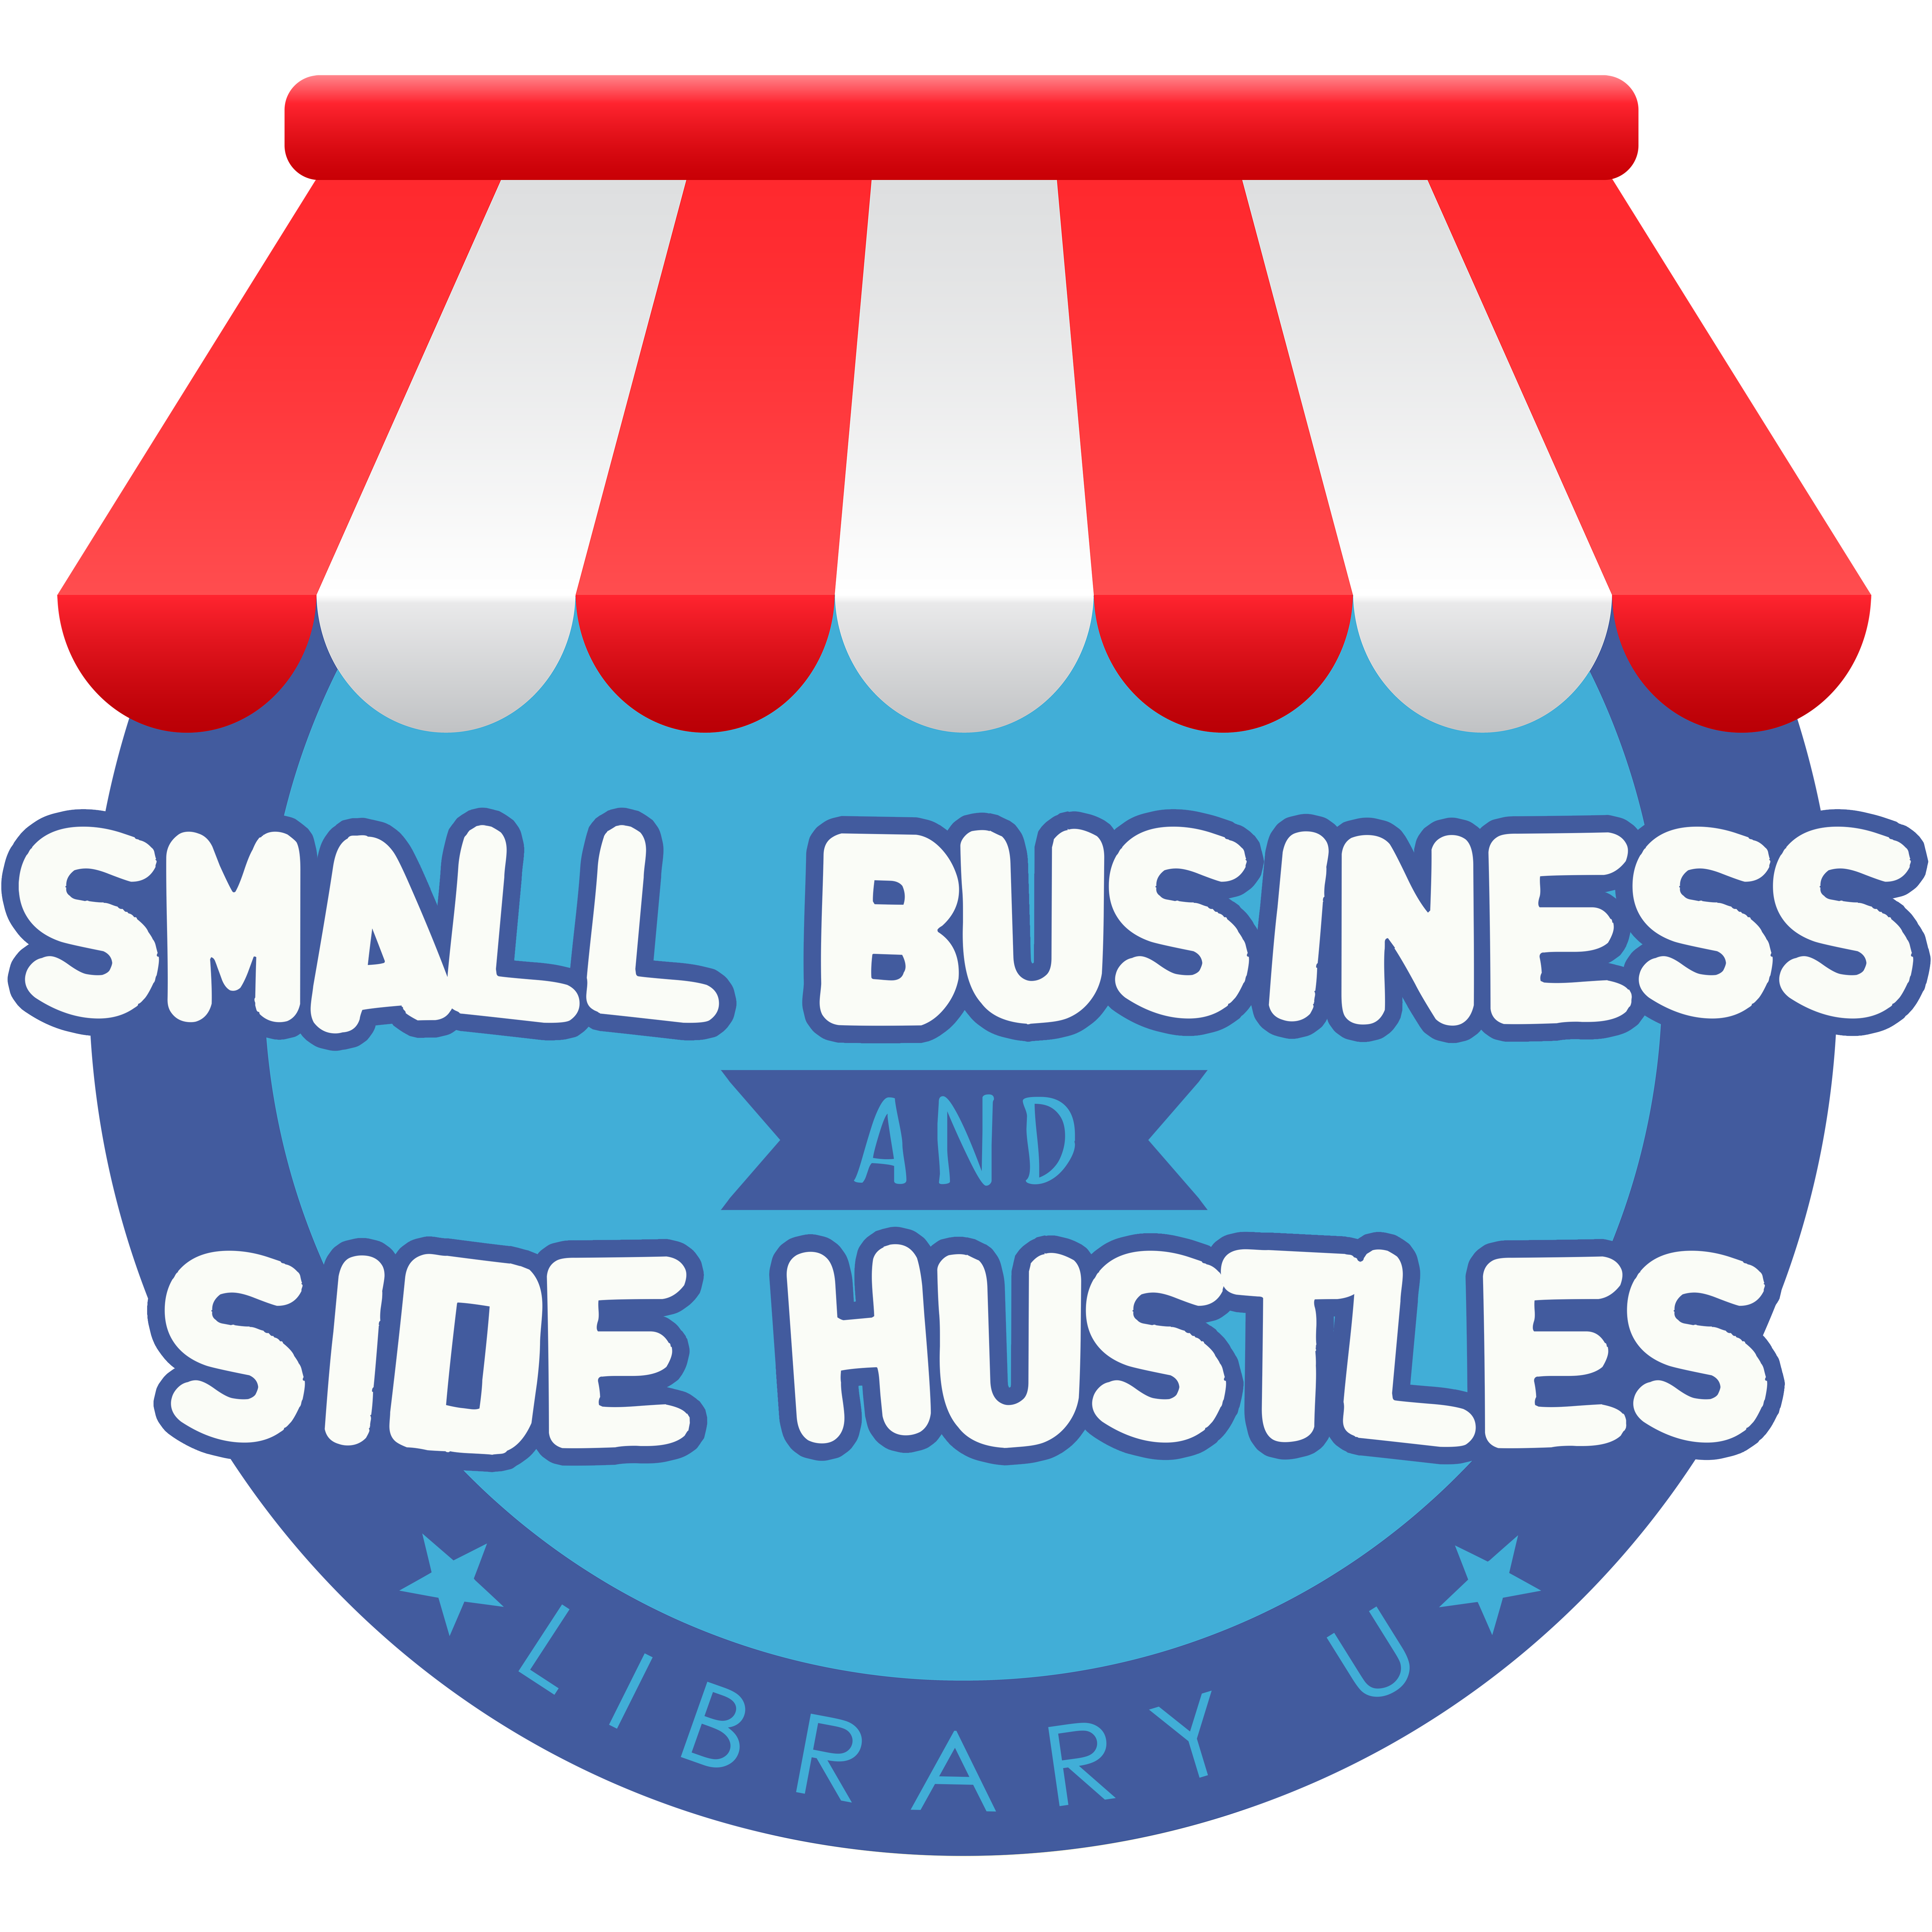 Small Business and Side Hustles - a Library U newsletter